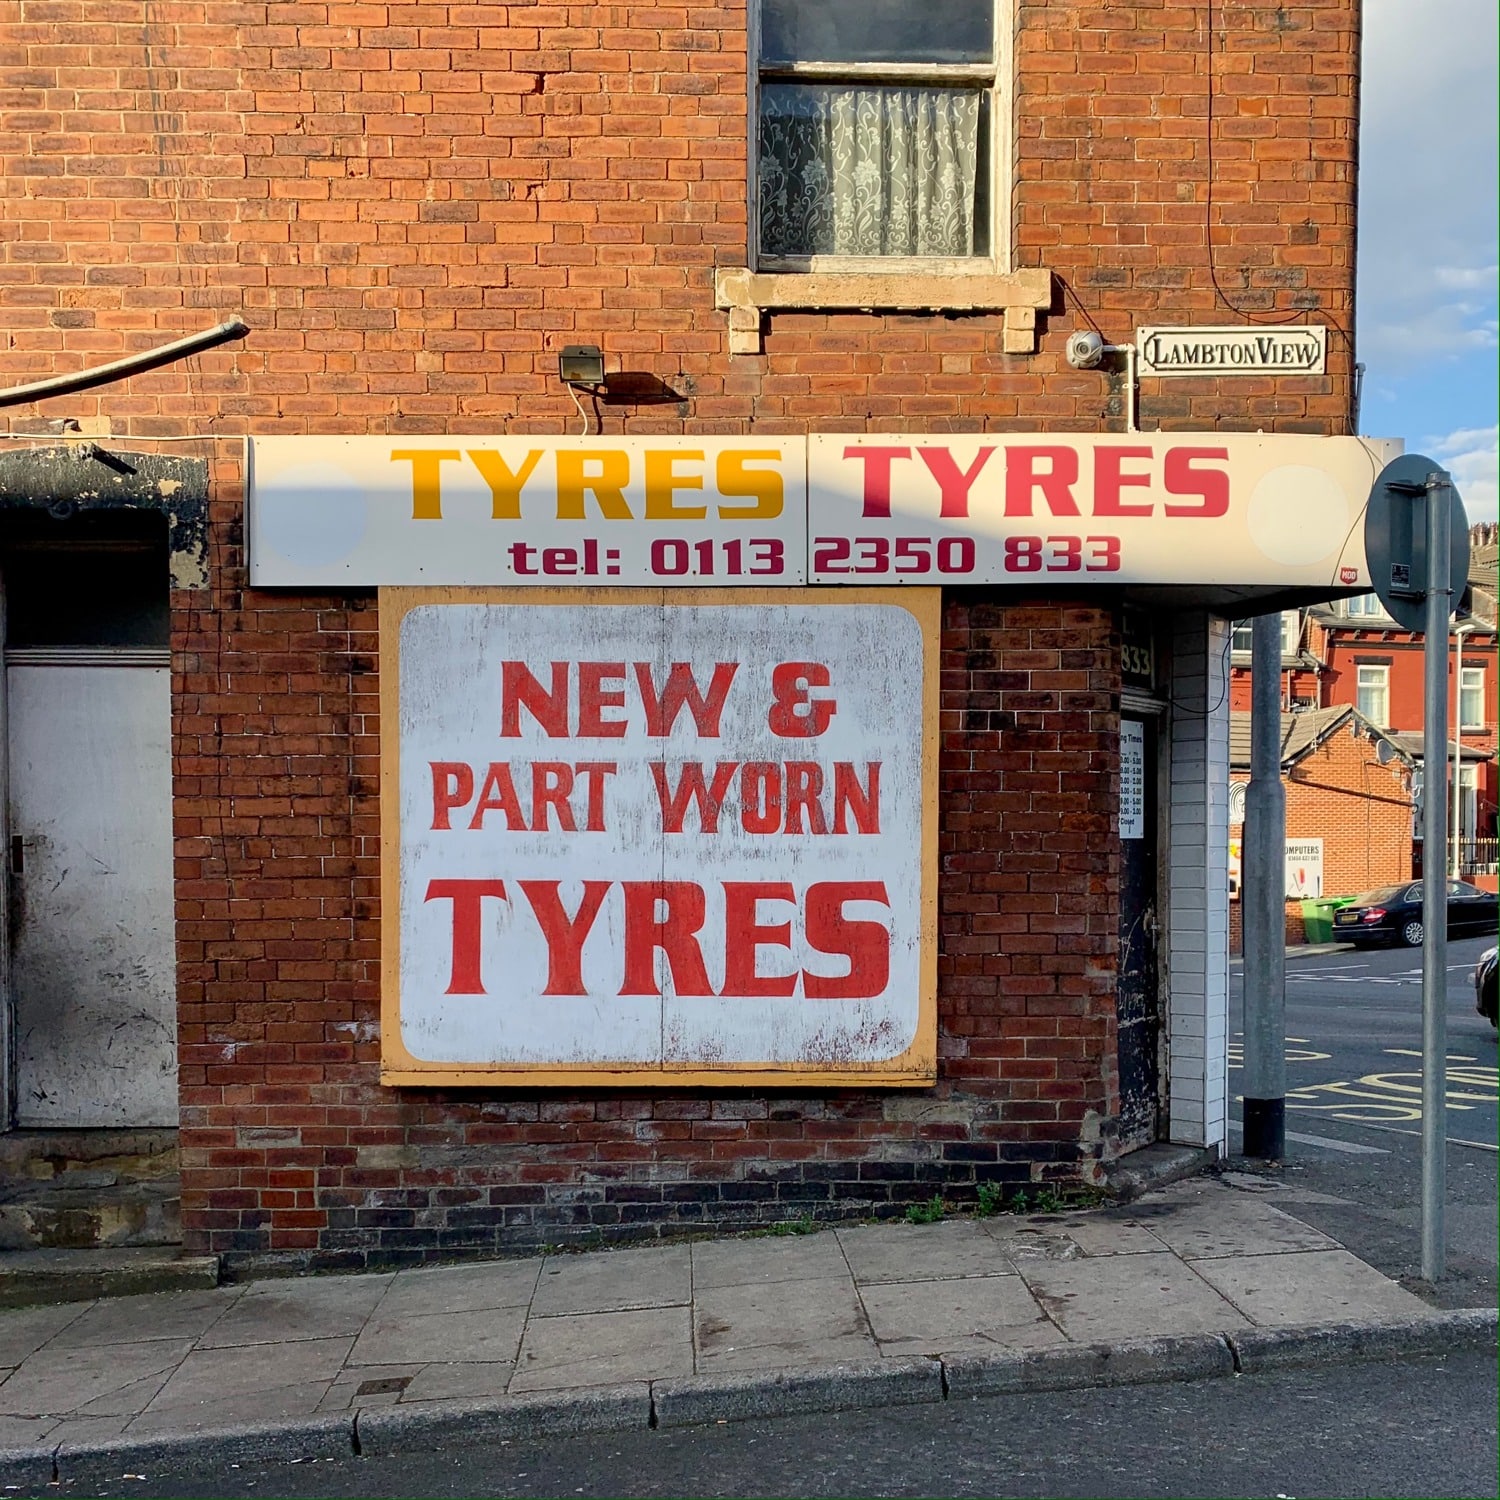 Hannah Platt's photograph, Lambton View, Leeds - 25th March 2021, showing an advert on a terrace corner for Tyres and Tyres